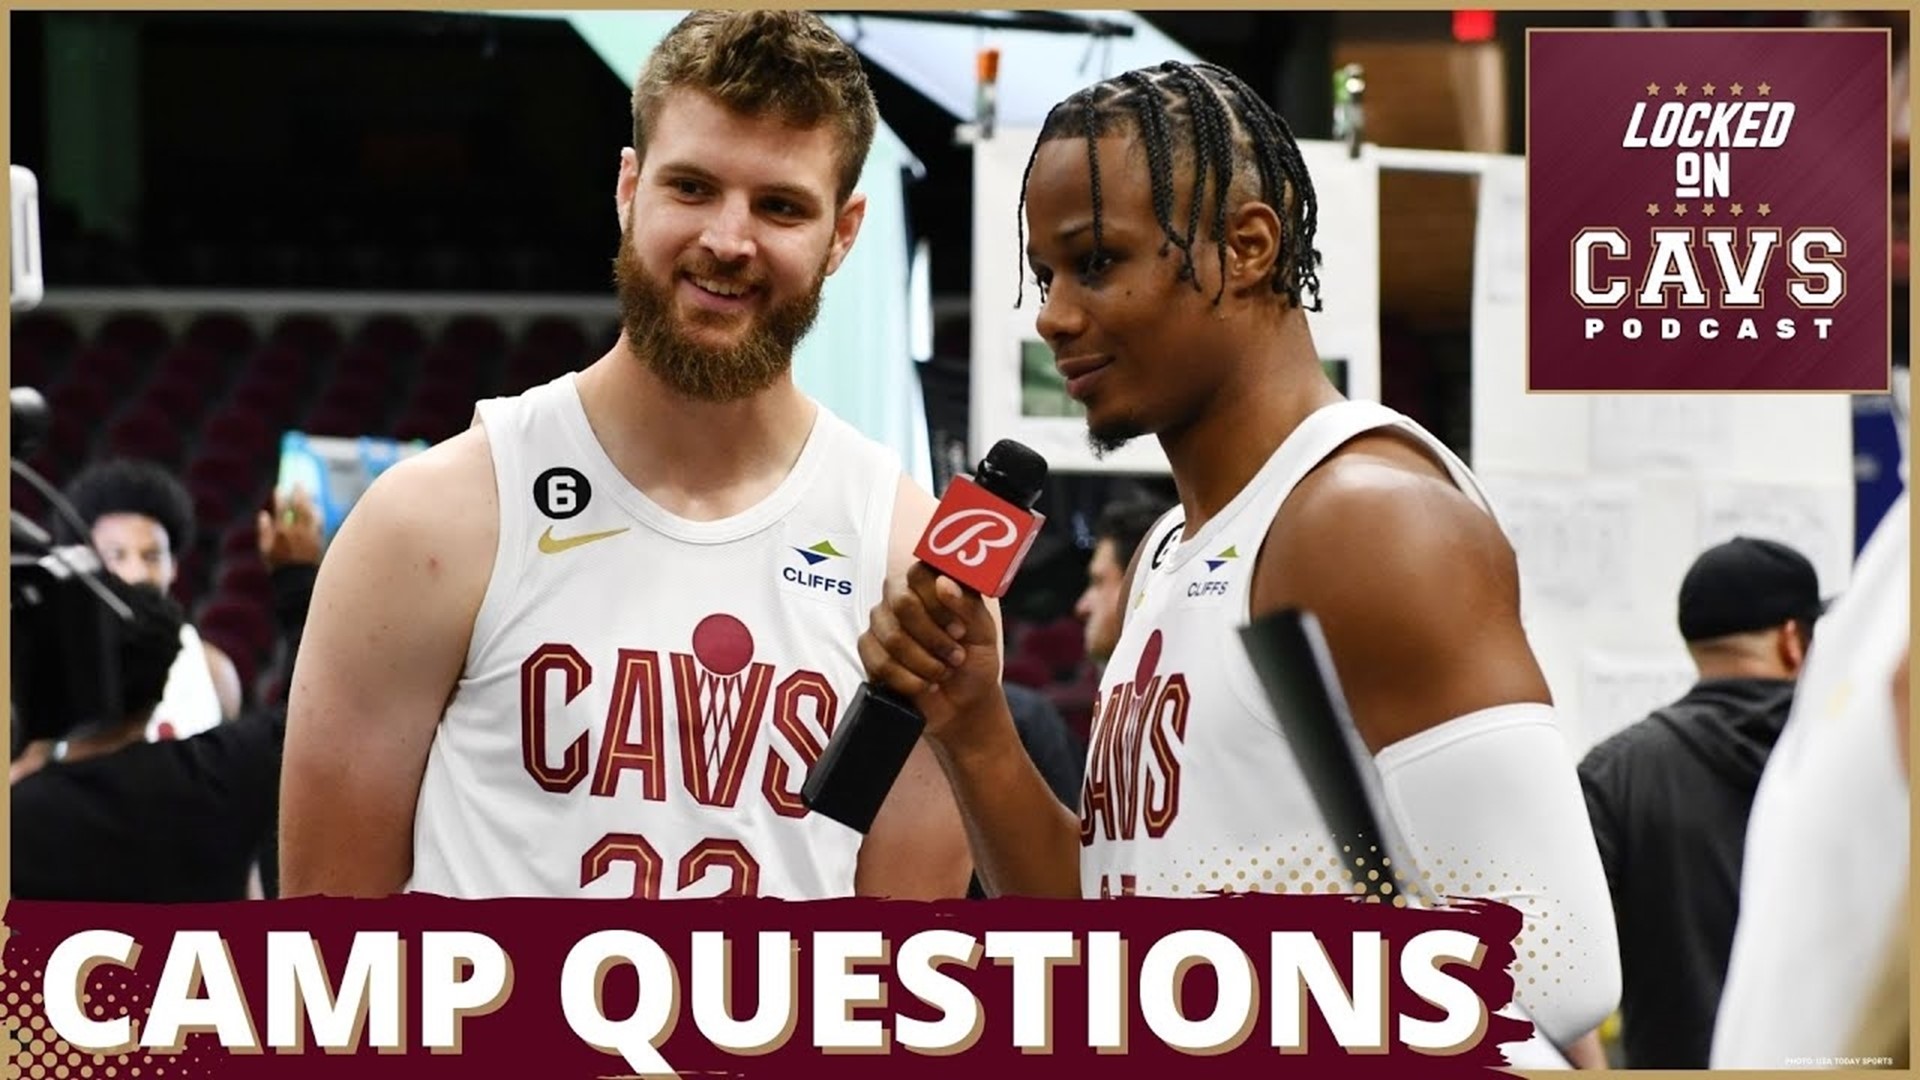 Chris and Evan talk about the Cavs' latest training camp signings, who might start at the three and the backup point guard situation